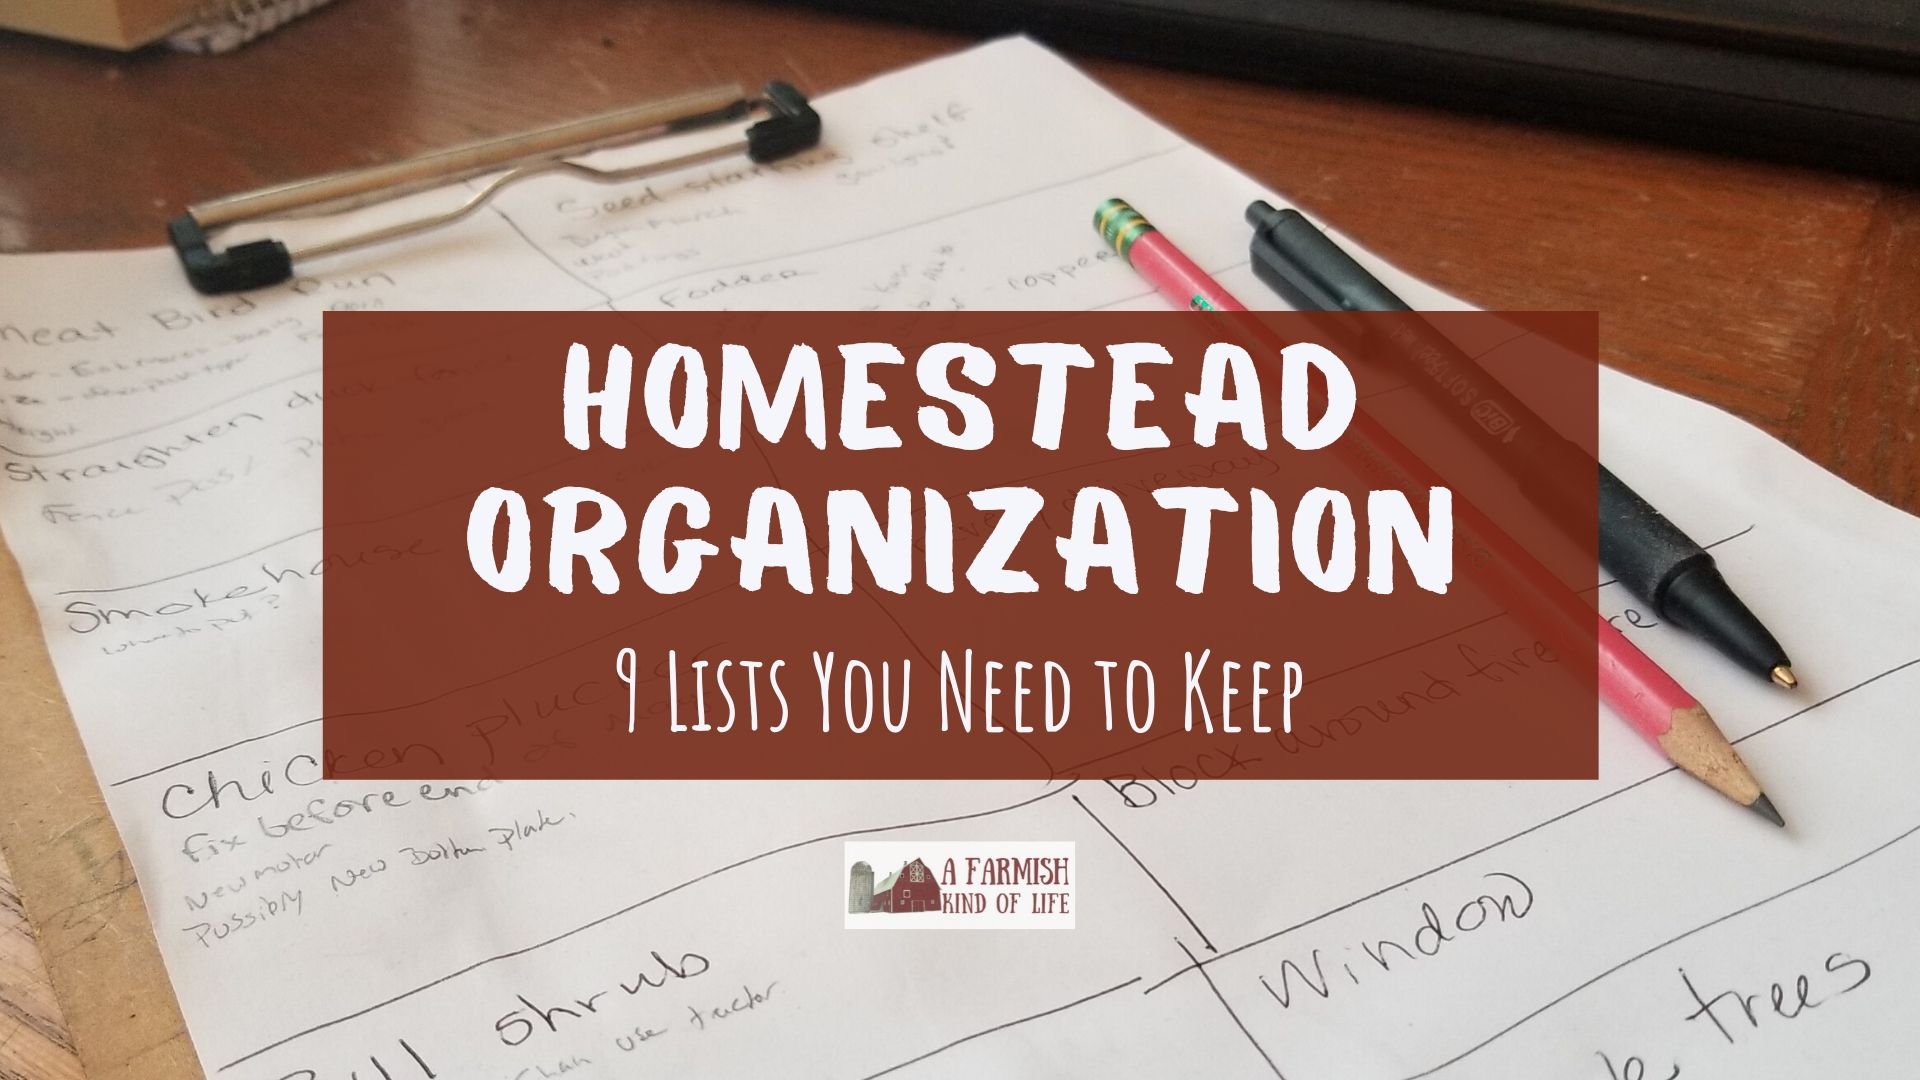 9 Lists You Need for Homestead Organization